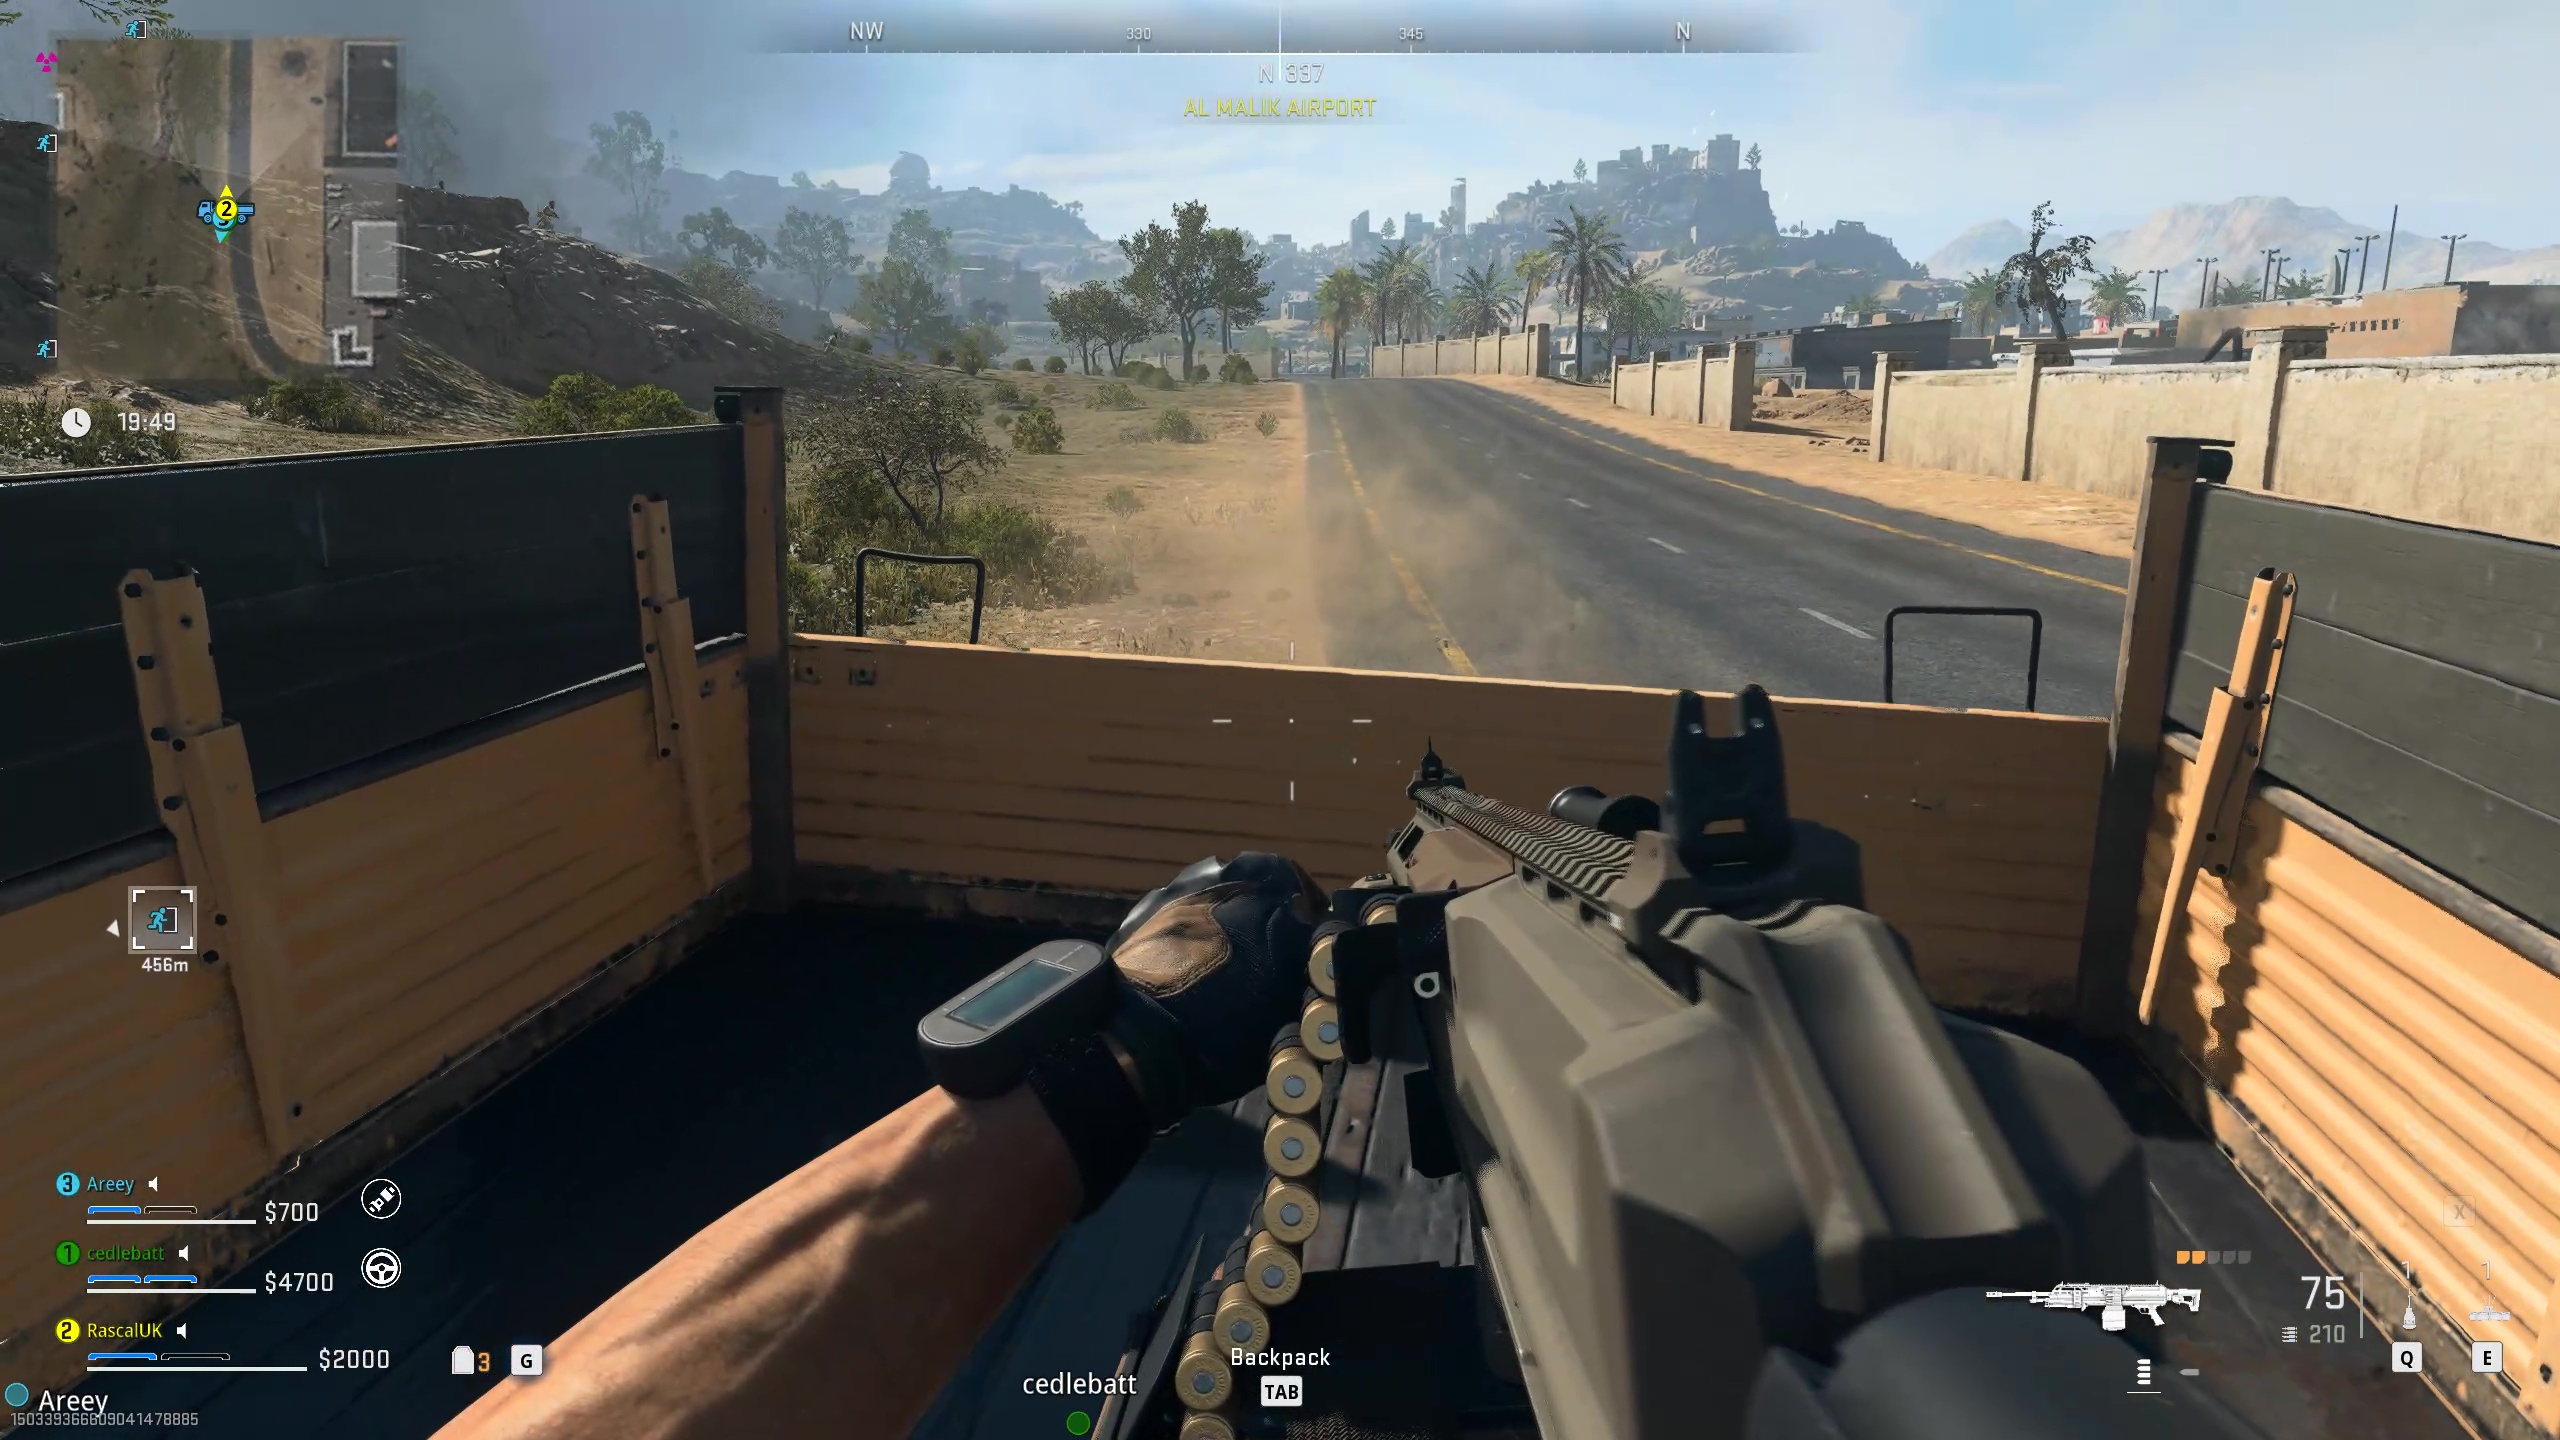 Riding in the back of a vehicle with your squad mates can be hugely exciting.